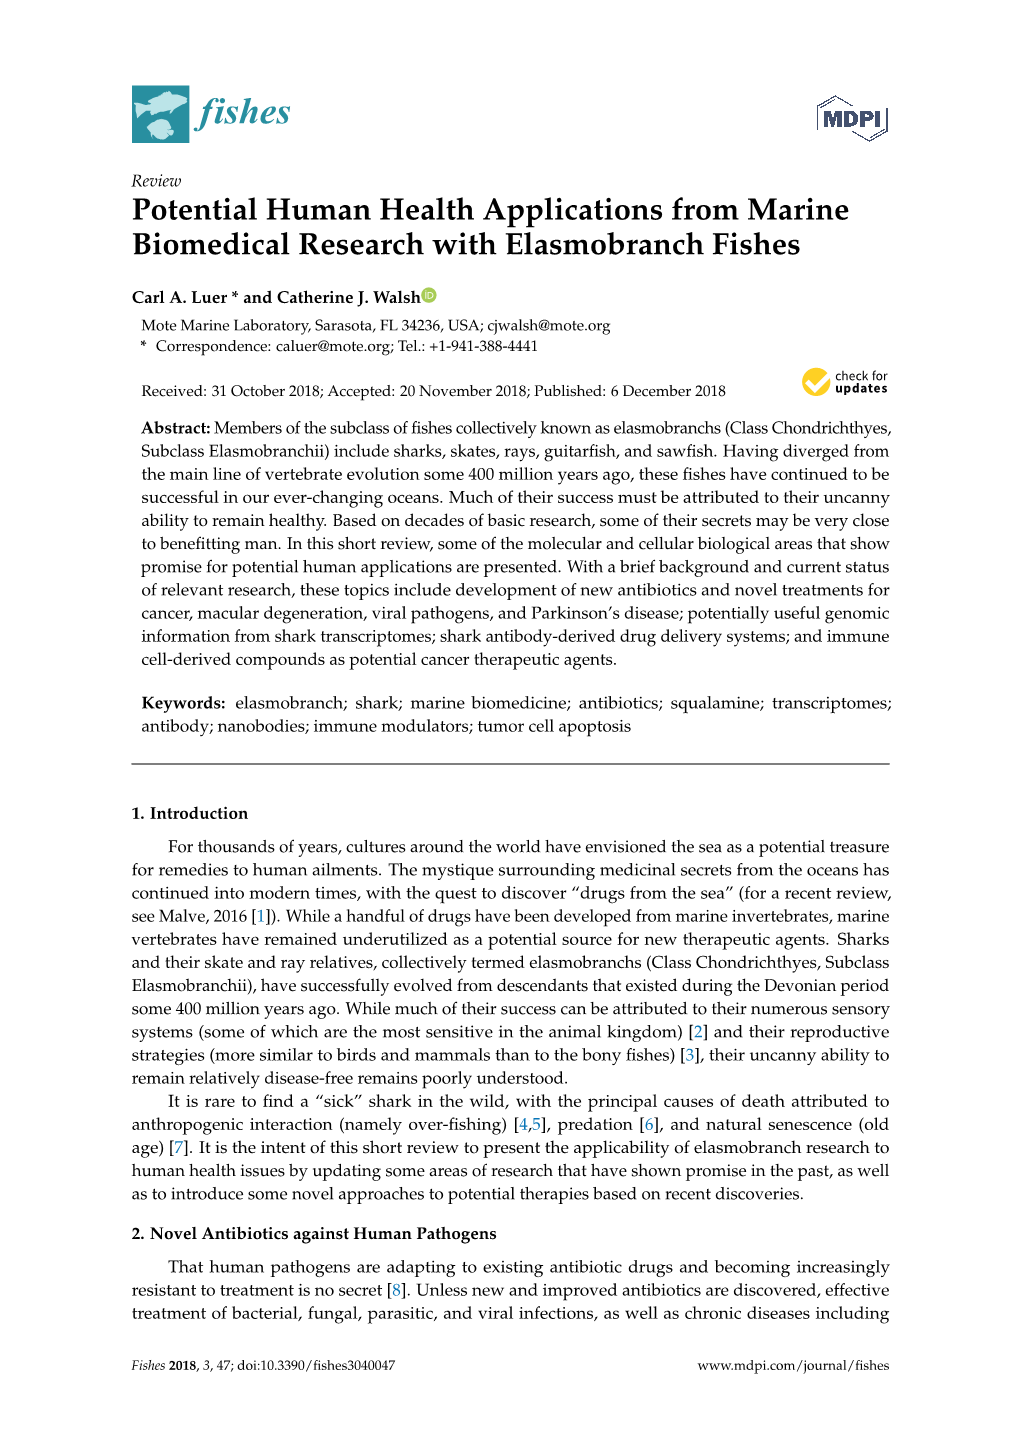 Potential Human Health Applications from Marine Biomedical Research with Elasmobranch Fishes